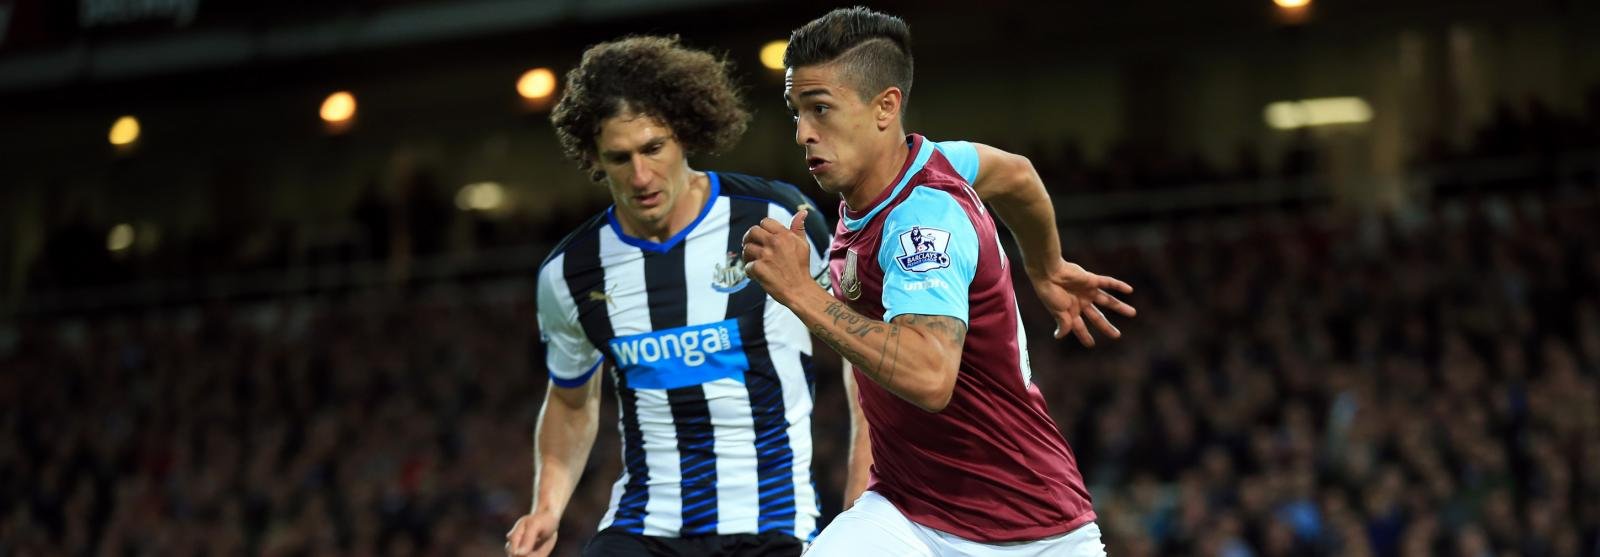 Is this Lanzini’s time to shine?